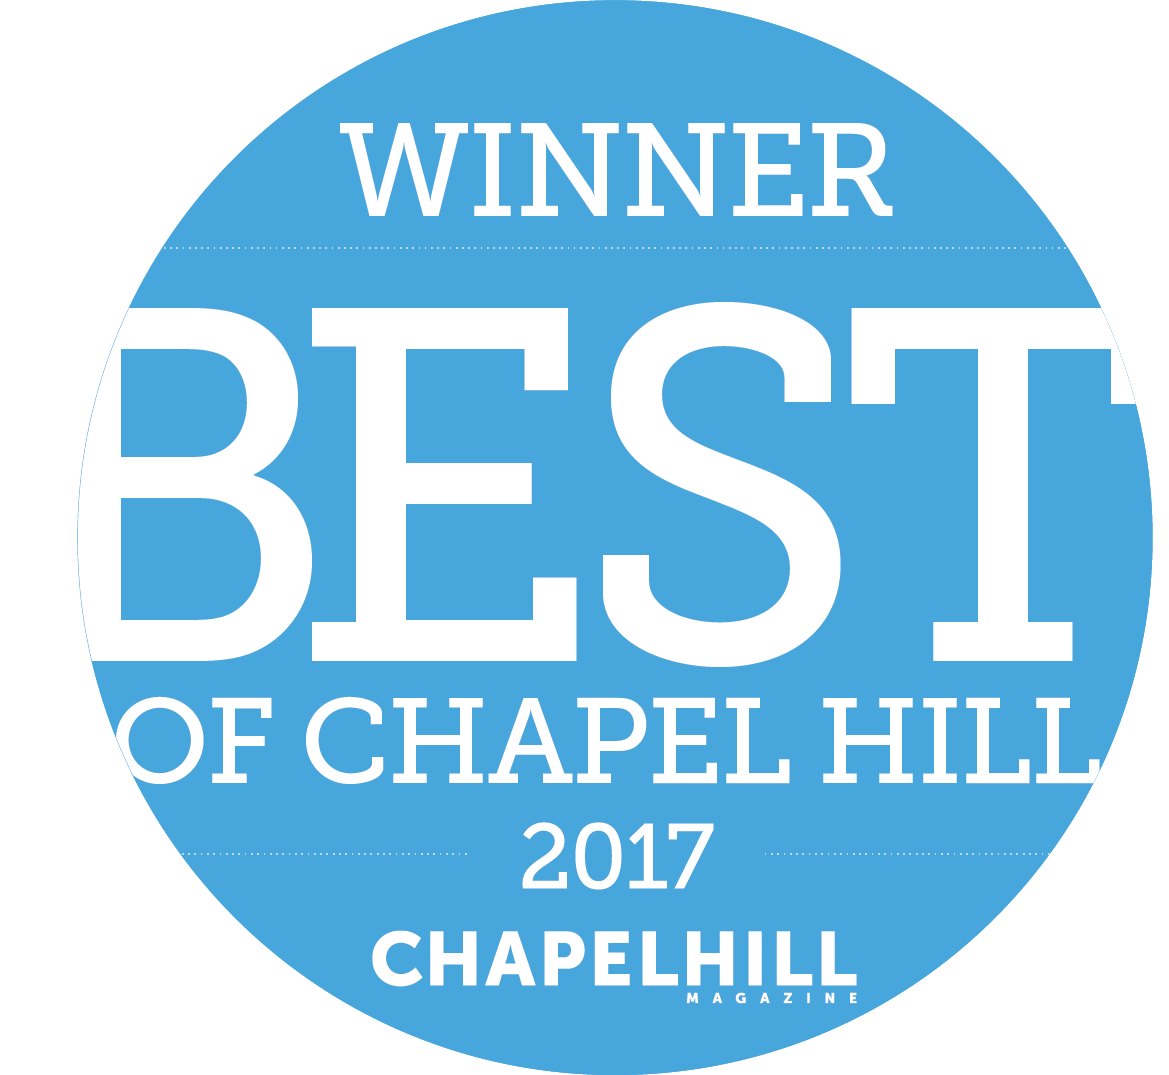 501 Pharmacy Named to Chapel Hill Magazine's “Best of Chapel Hill” 2017!